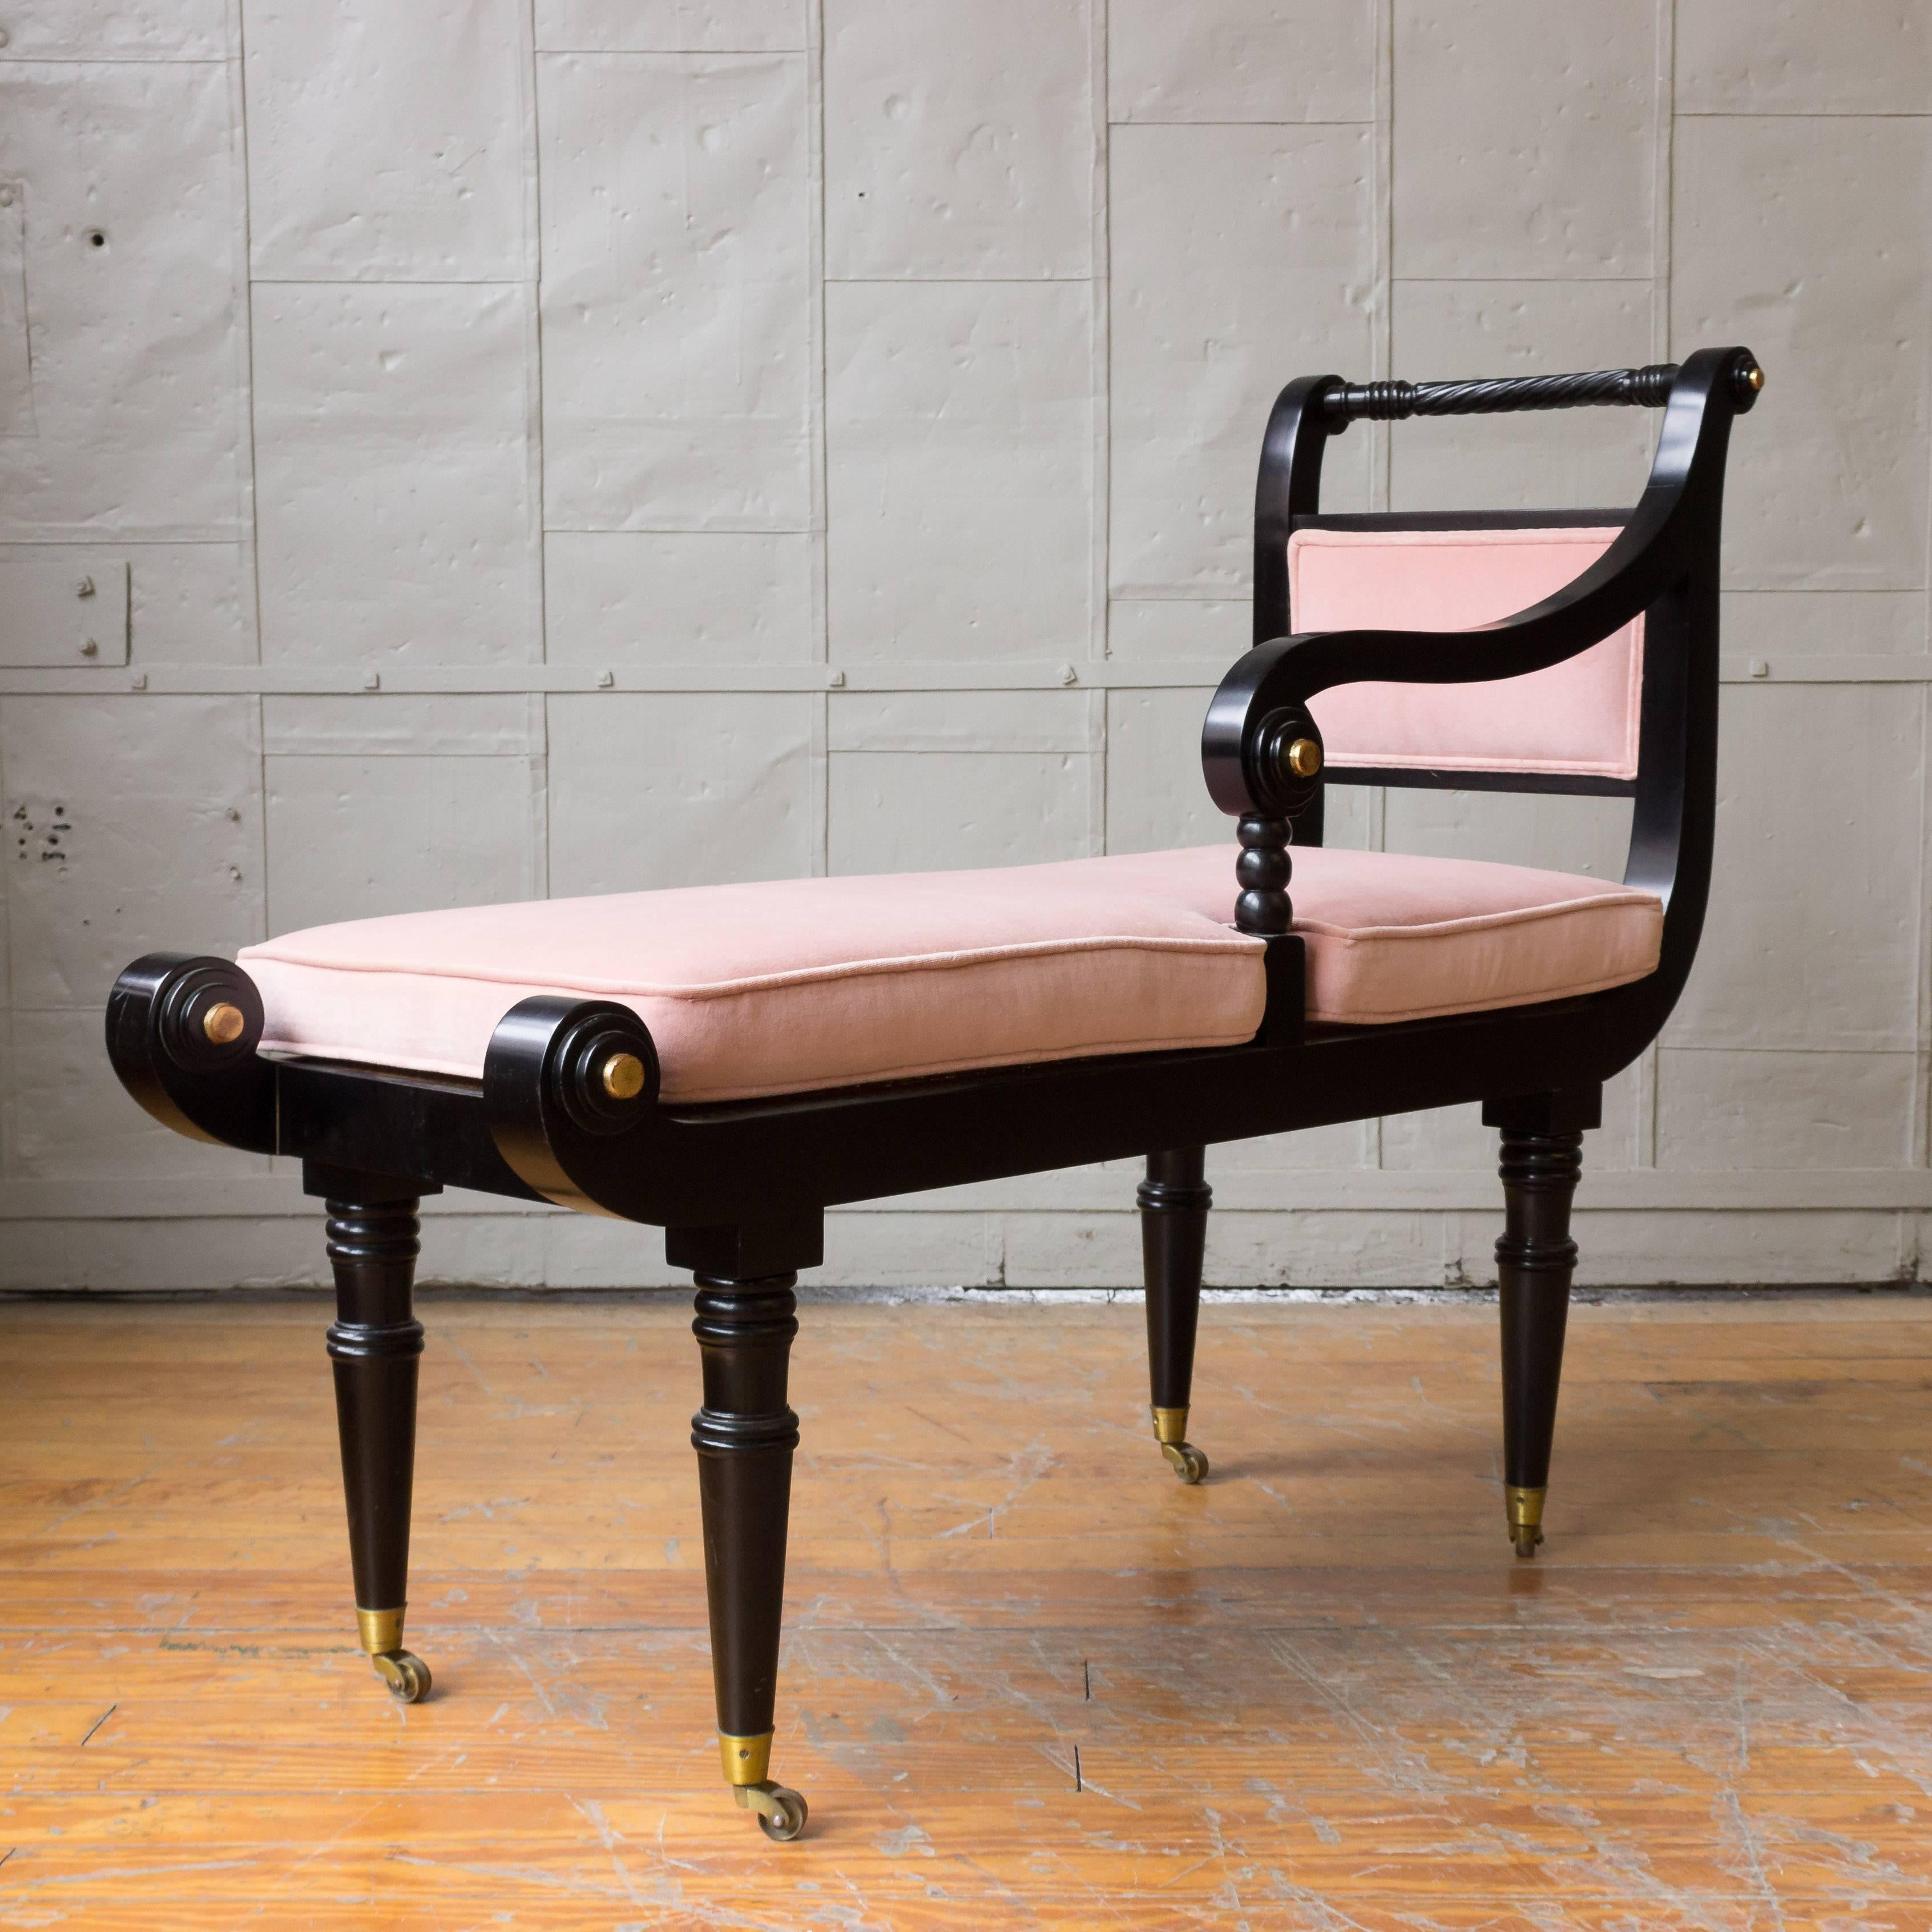 Ebonized Empire style bench with gold accents. The pink velvet cushion rests on a caned platform.